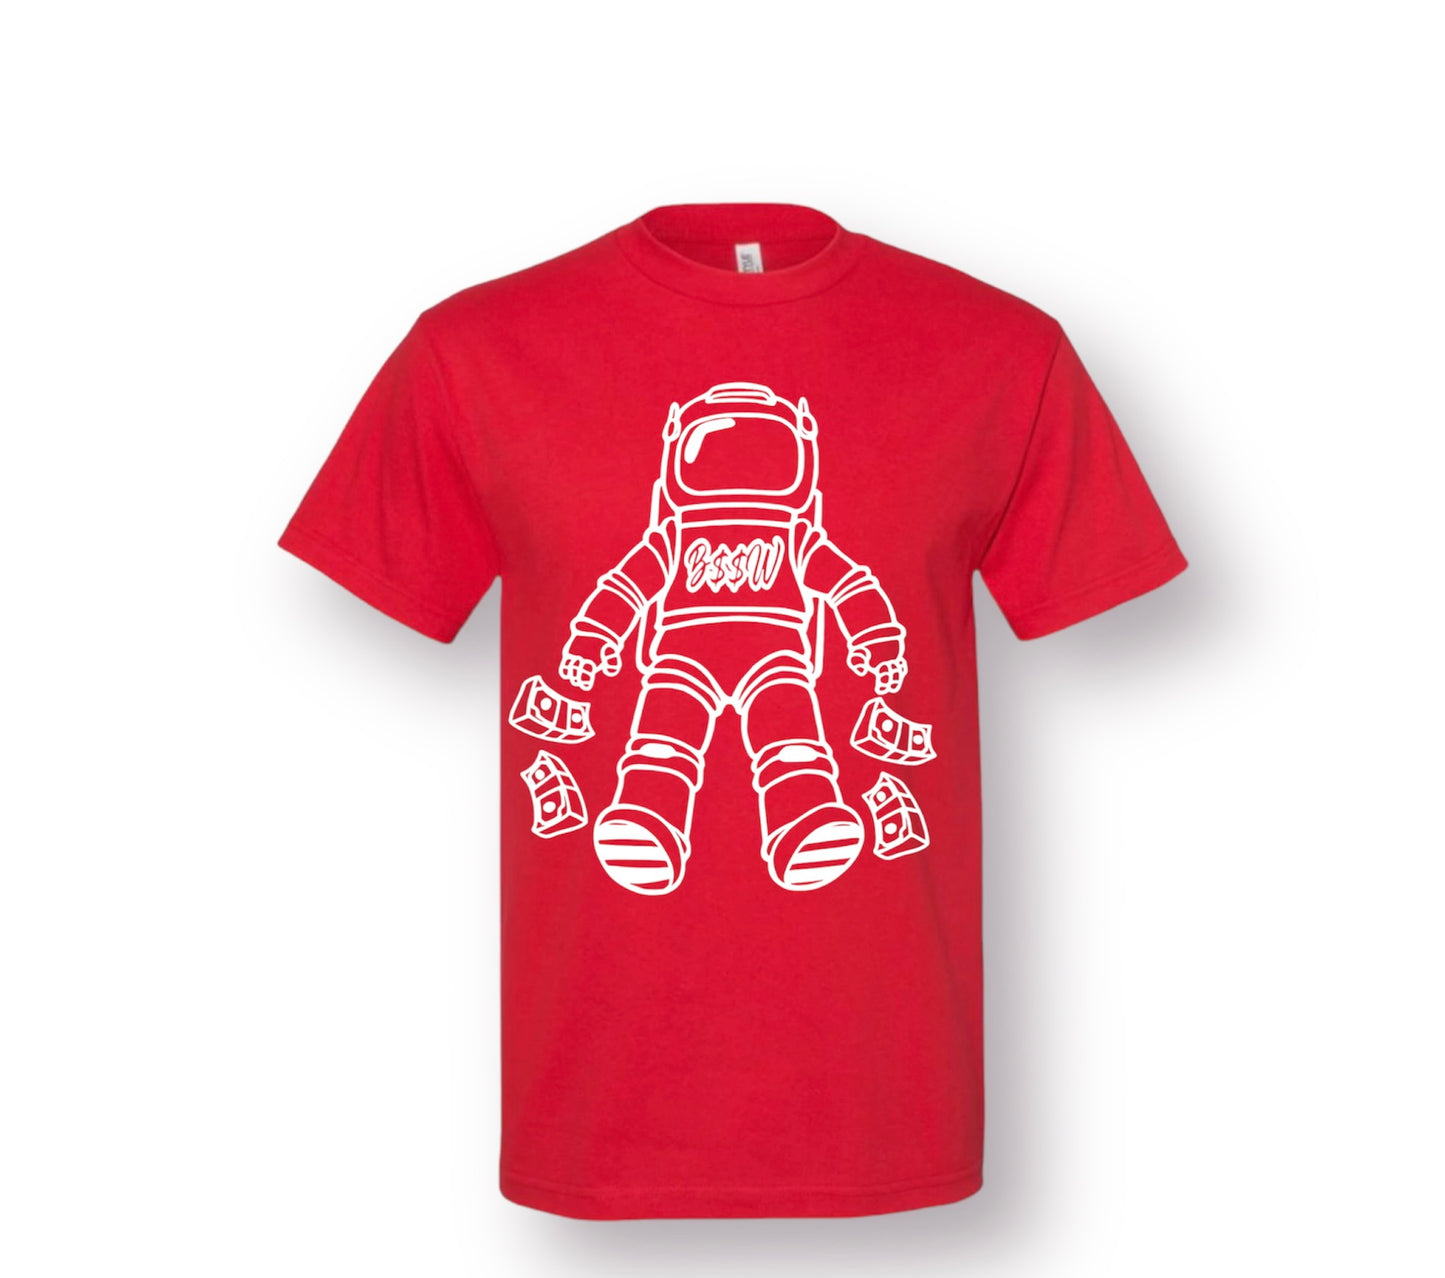 BSSW ASTRO TSHIRTS